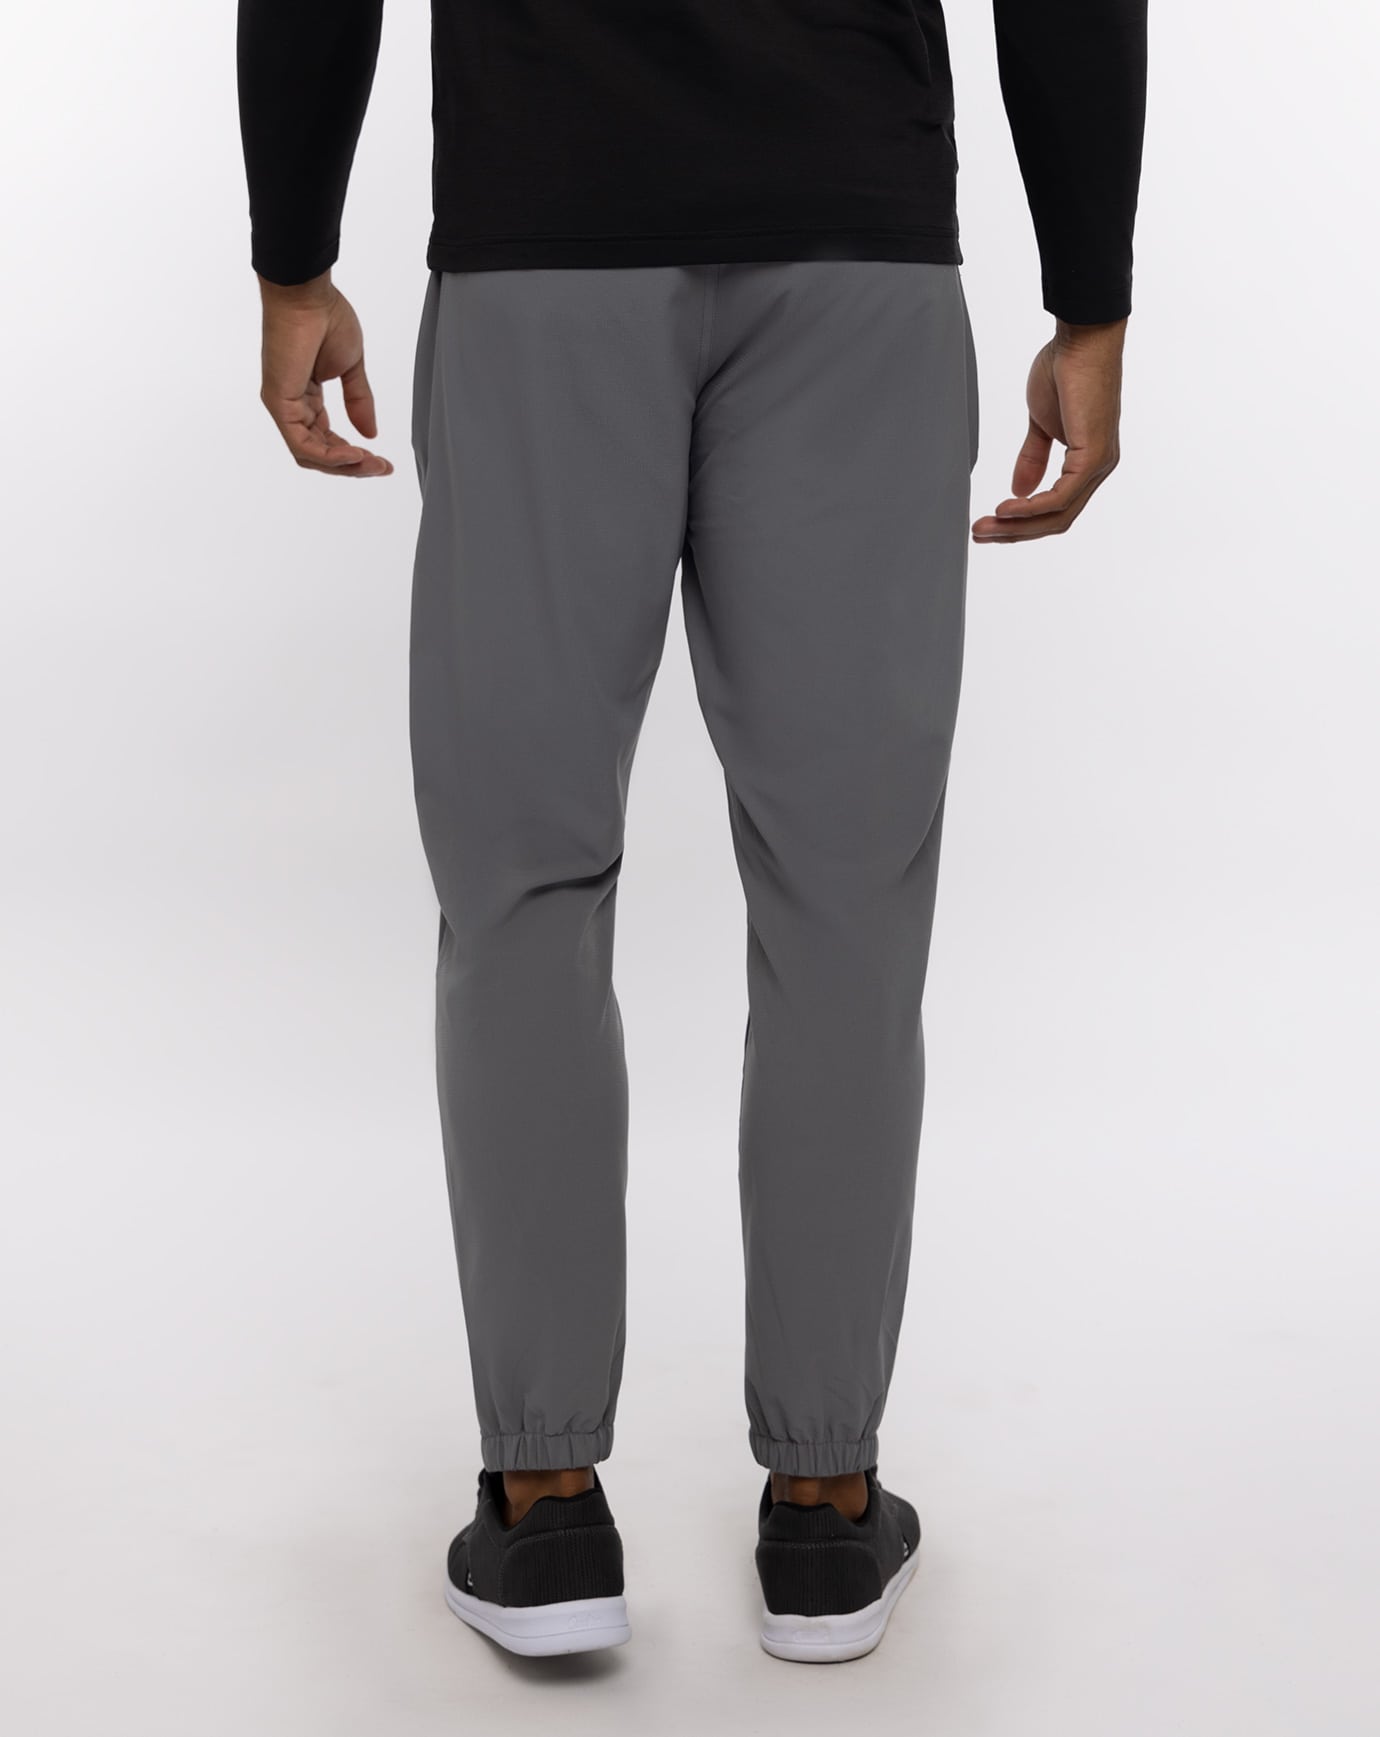 TRAVEL 2.0 ACTIVE PANT Image 3